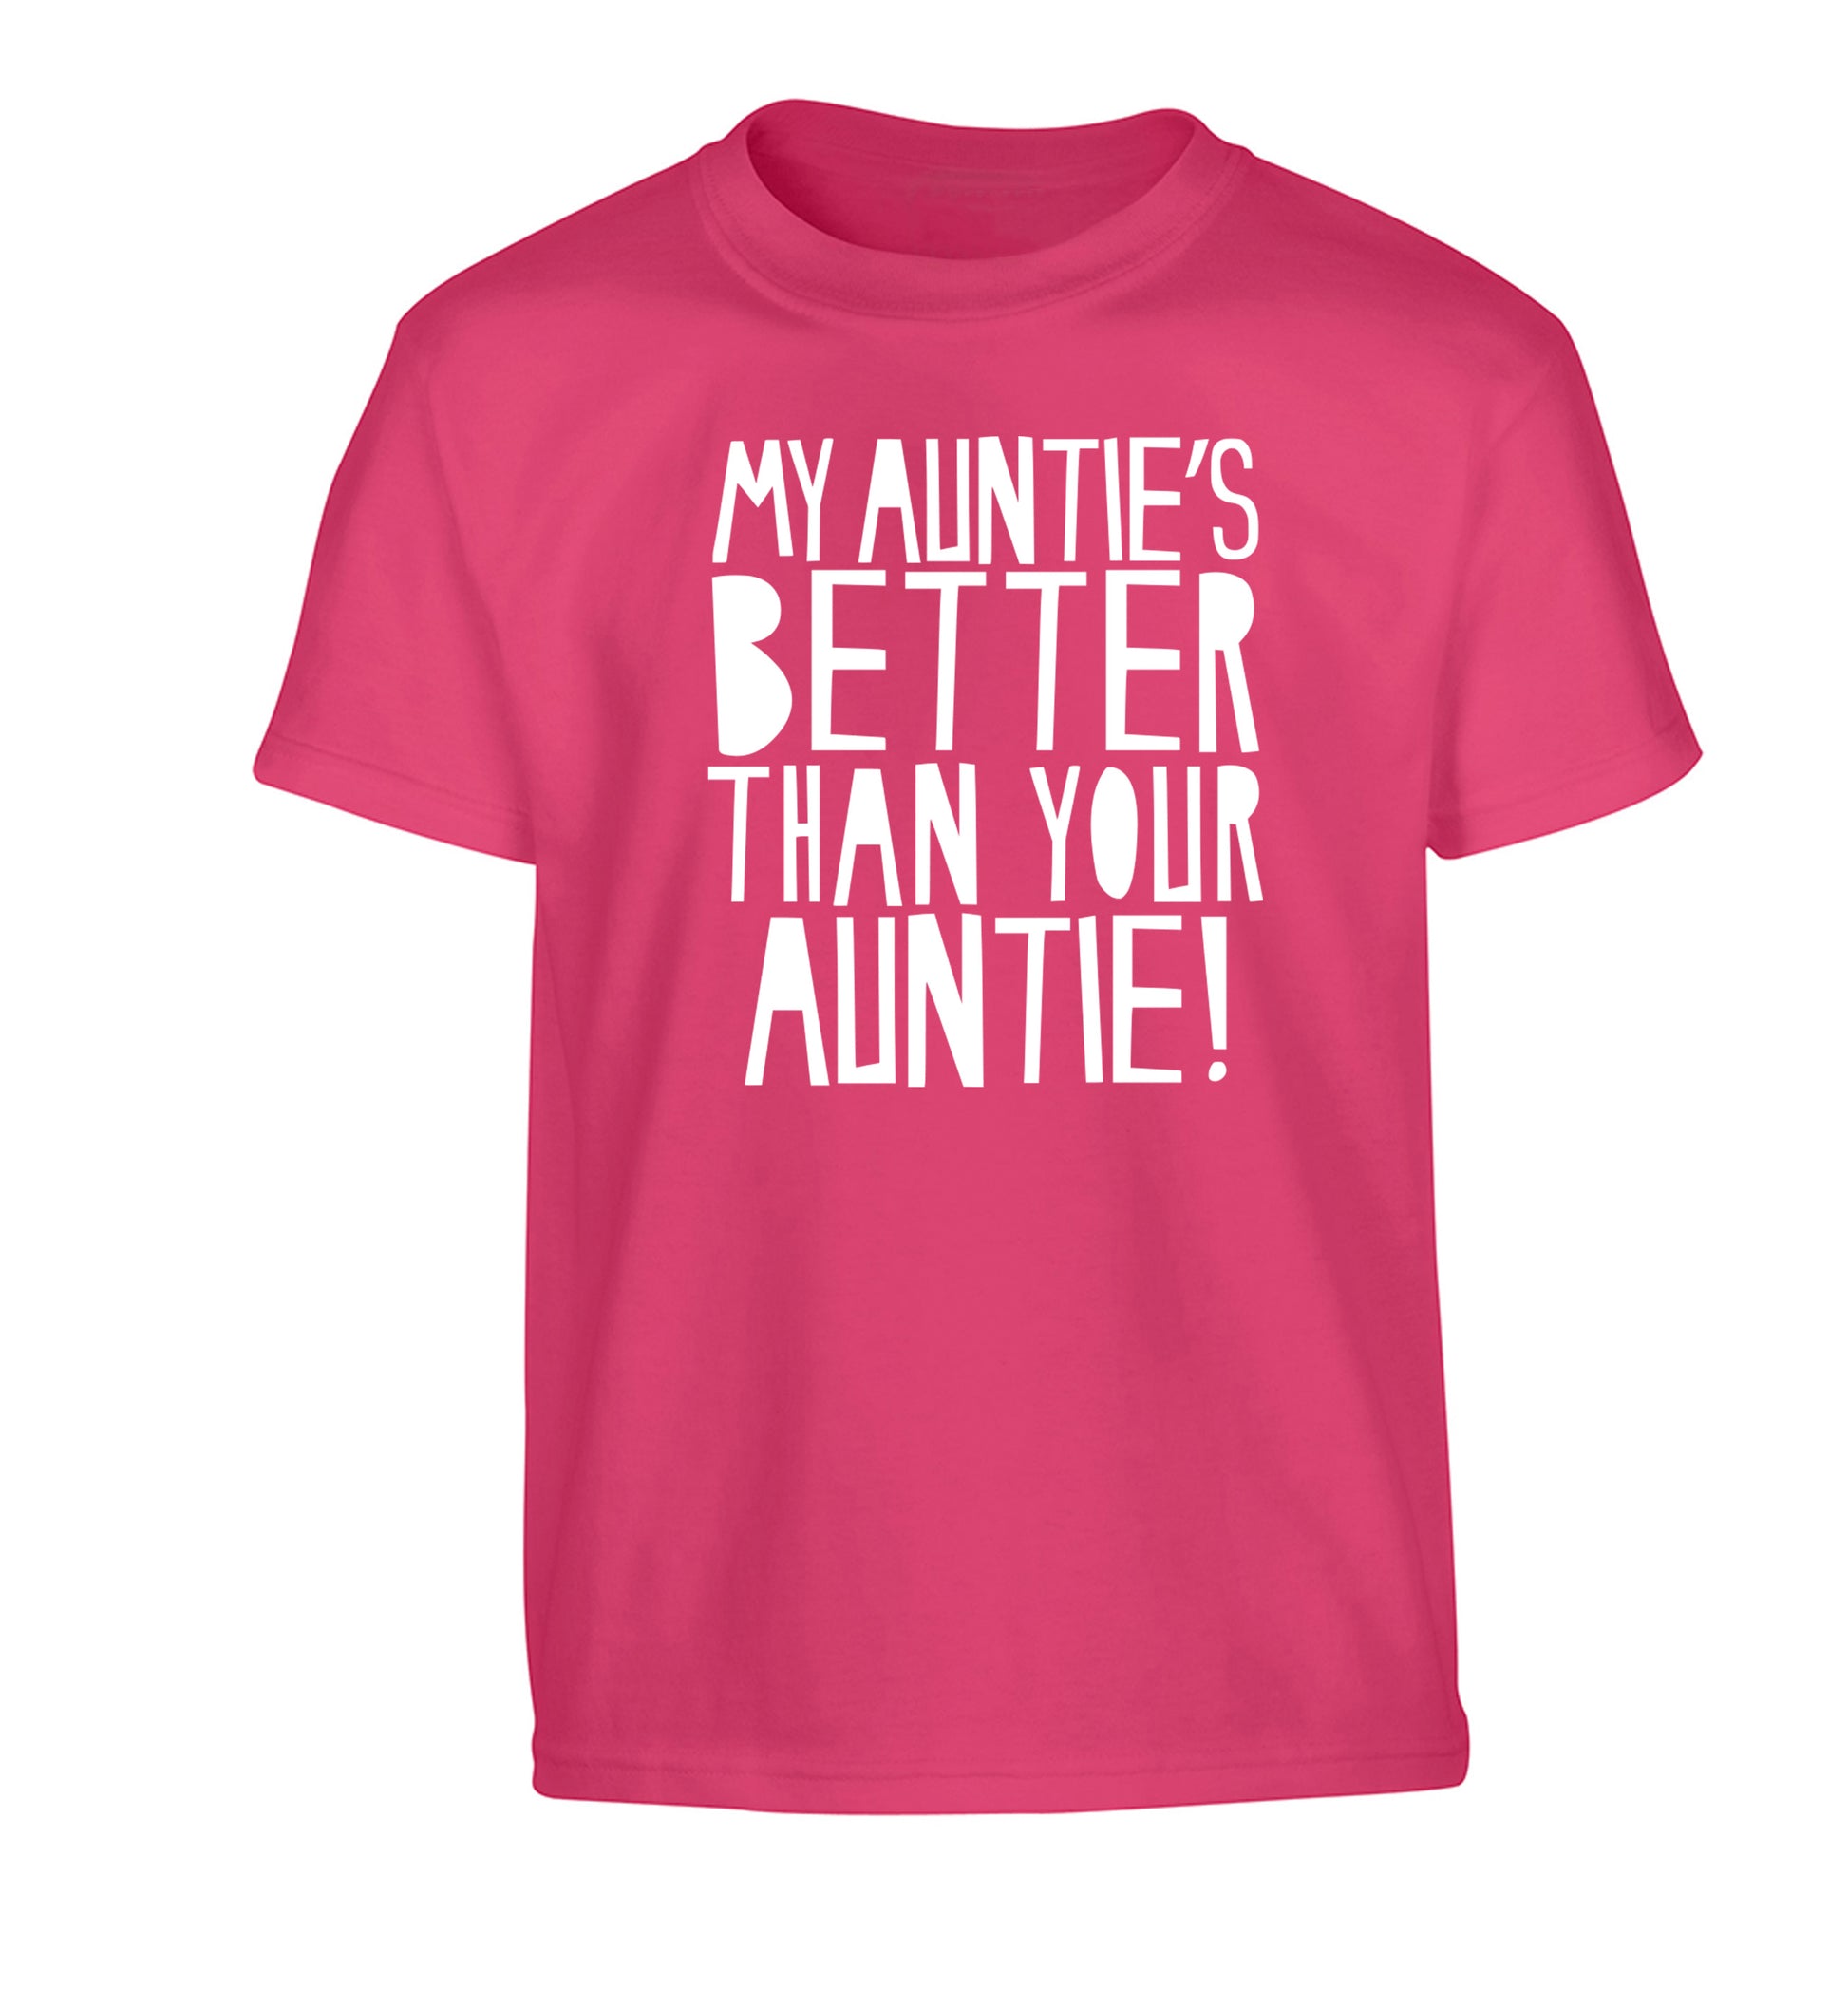 My auntie's better than your auntie Children's pink Tshirt 12-13 Years